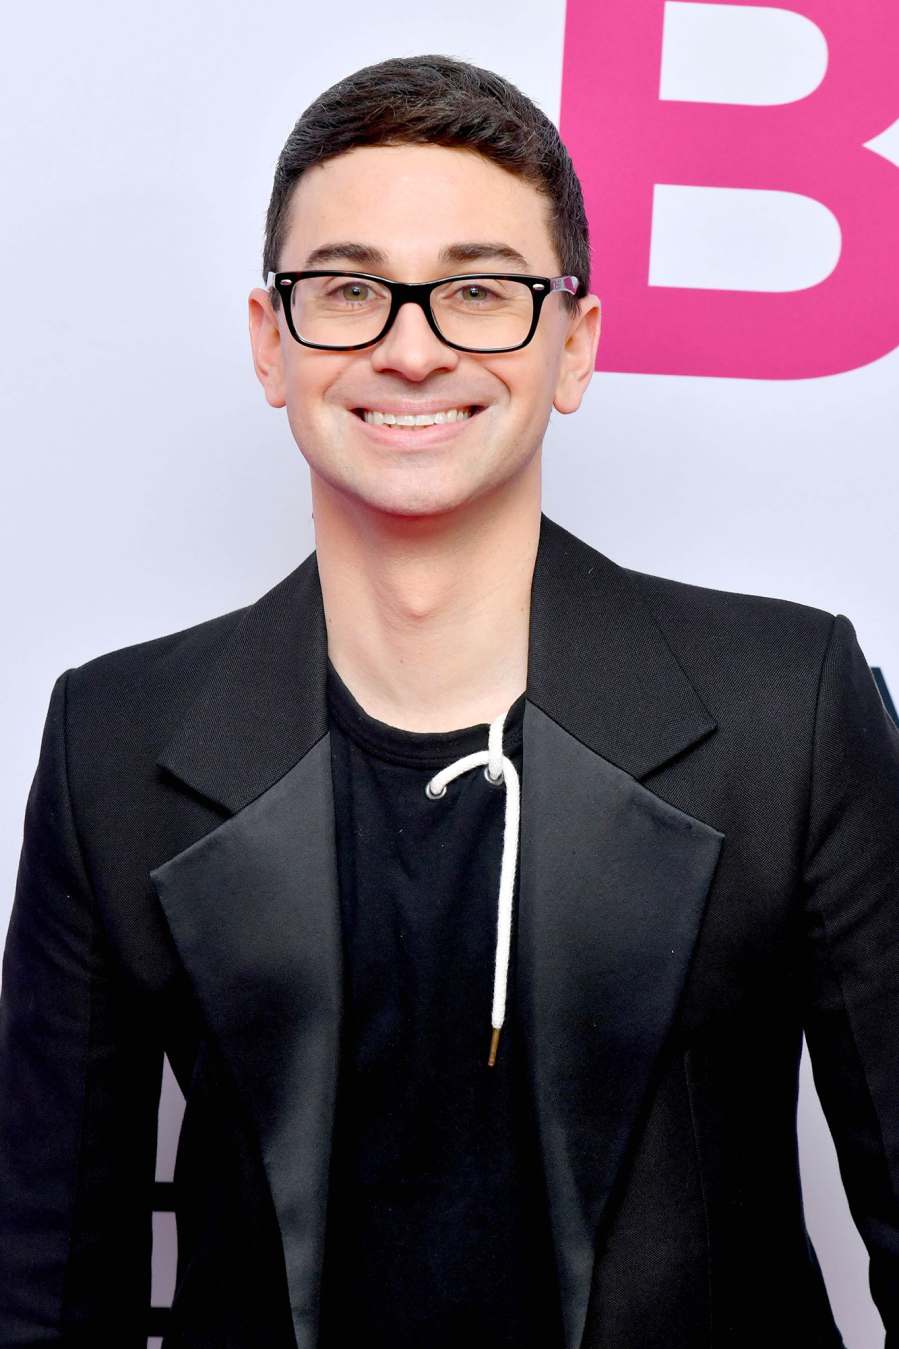 Christian Siriano Celebs Support the FreeBritney Movement